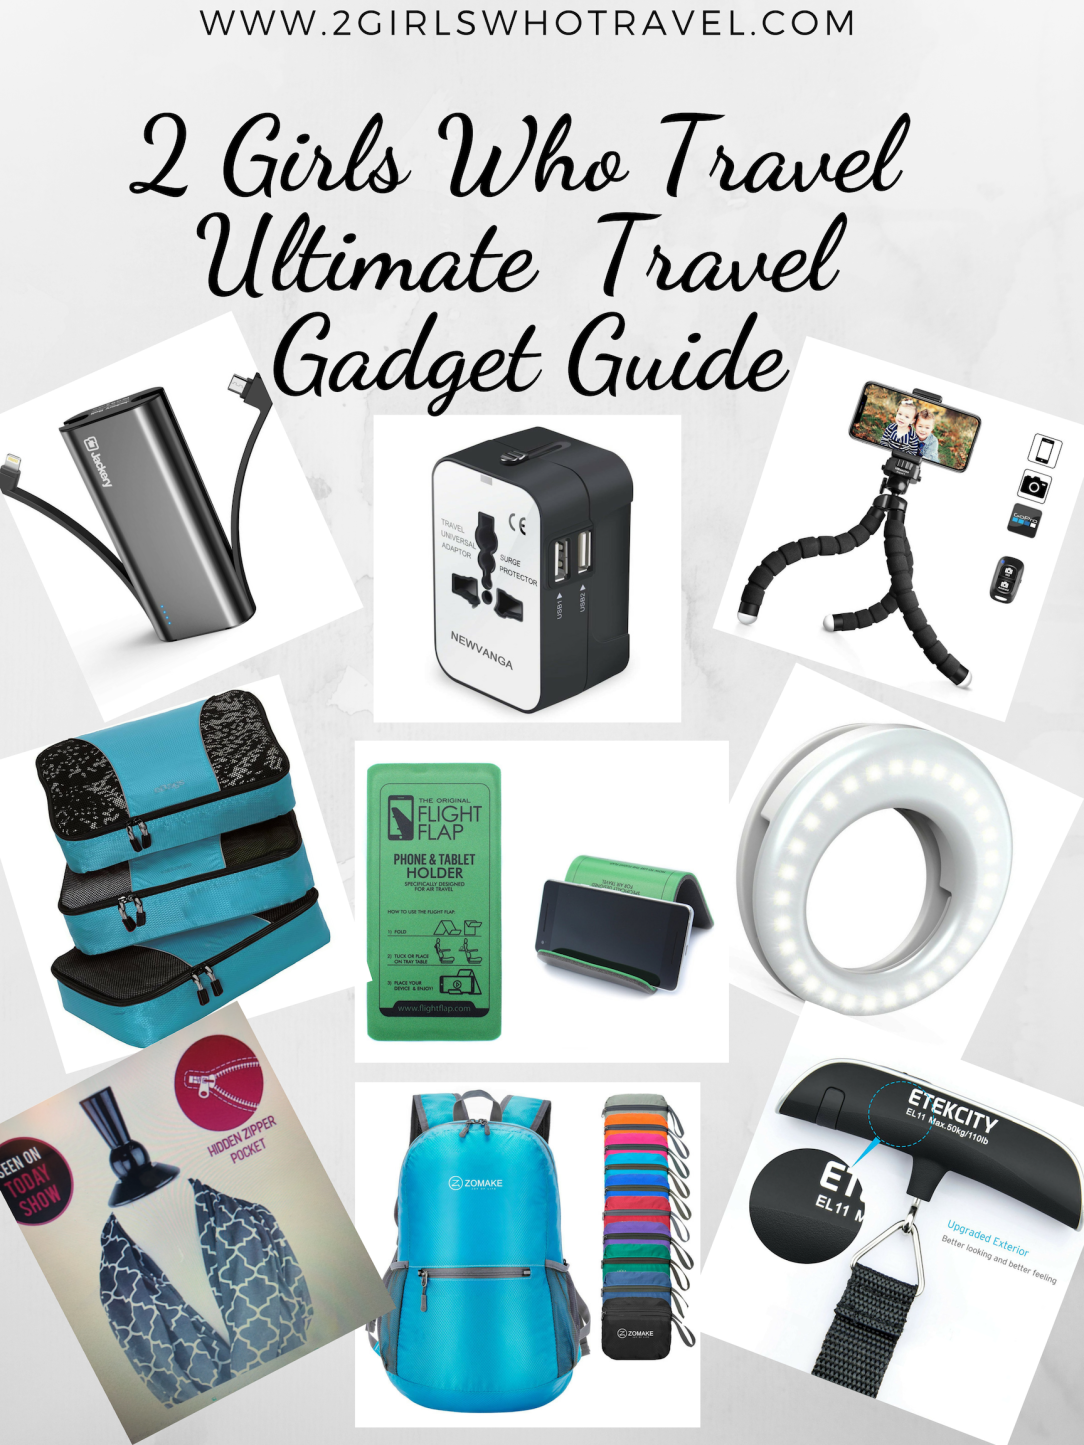 2 Girls Who Travel Ultimate Travel Gadget Guide – 2girlswhotravel